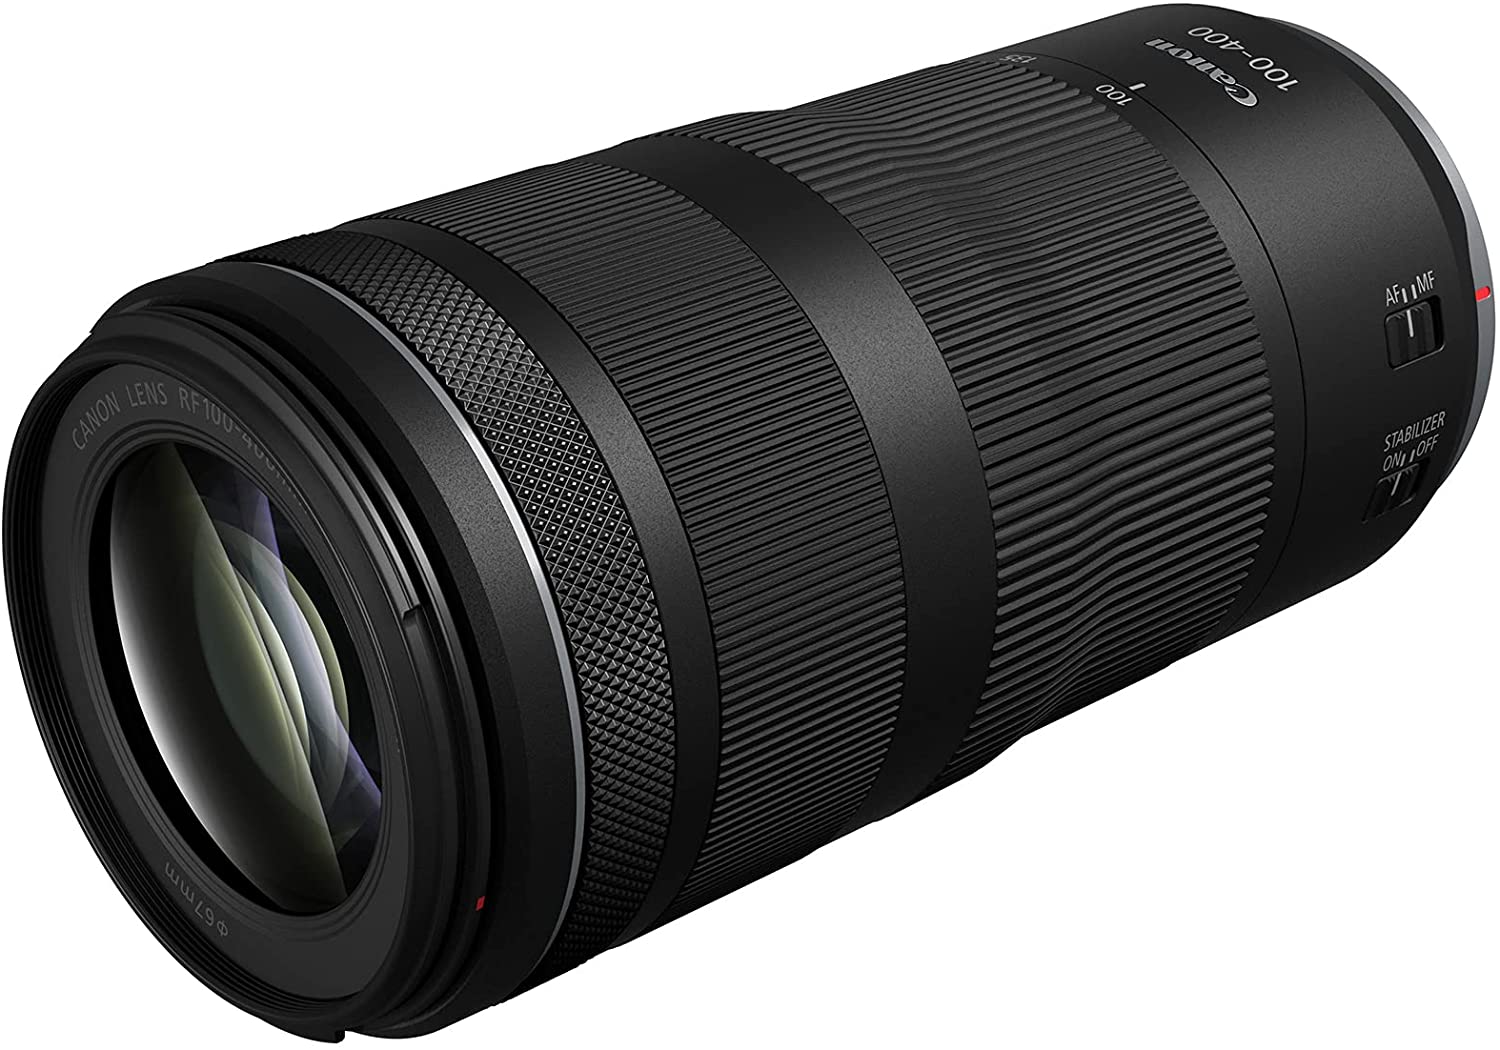 Canon RF 100-400mm f/5.6-8 IS USM and RF 16mm f/2.8 STM lenses